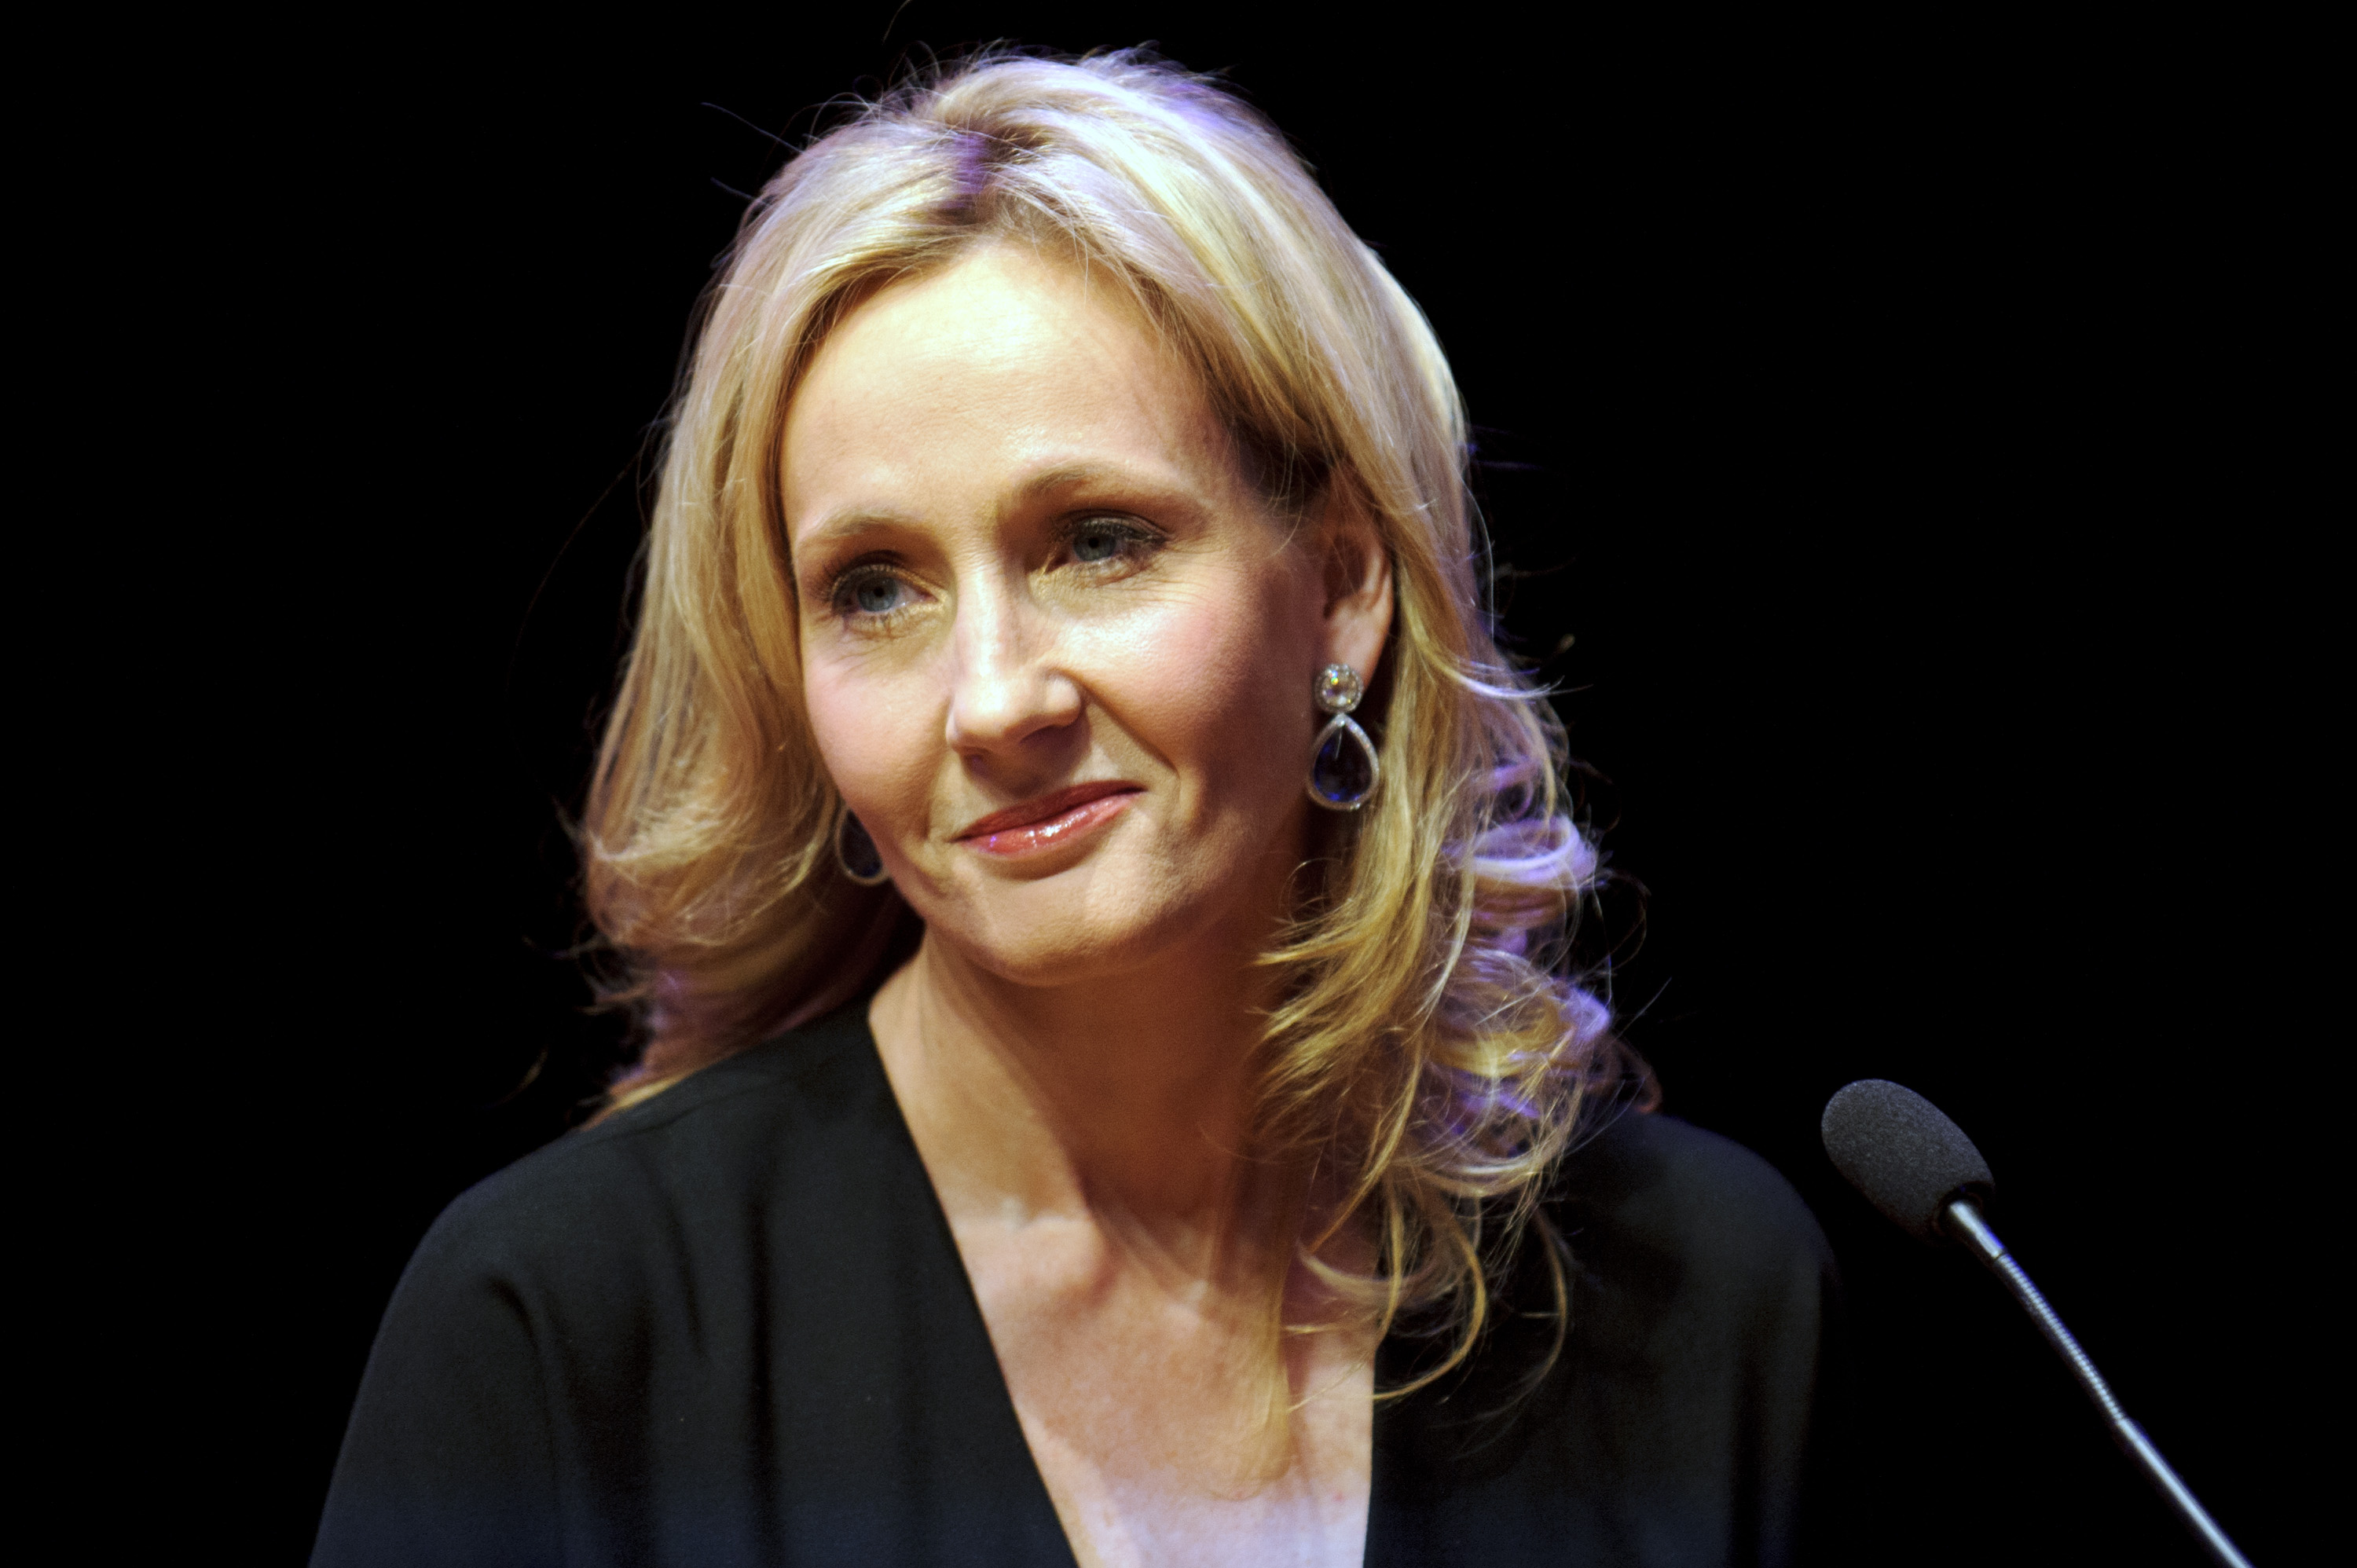 Author J.K. Rowling attends photocall ahead of her reading from 'The Casual Vacancy' at the Queen Elizabeth Hall on September 27, 2012 in London, England. (Ben A. Pruchnie—Getty Images)